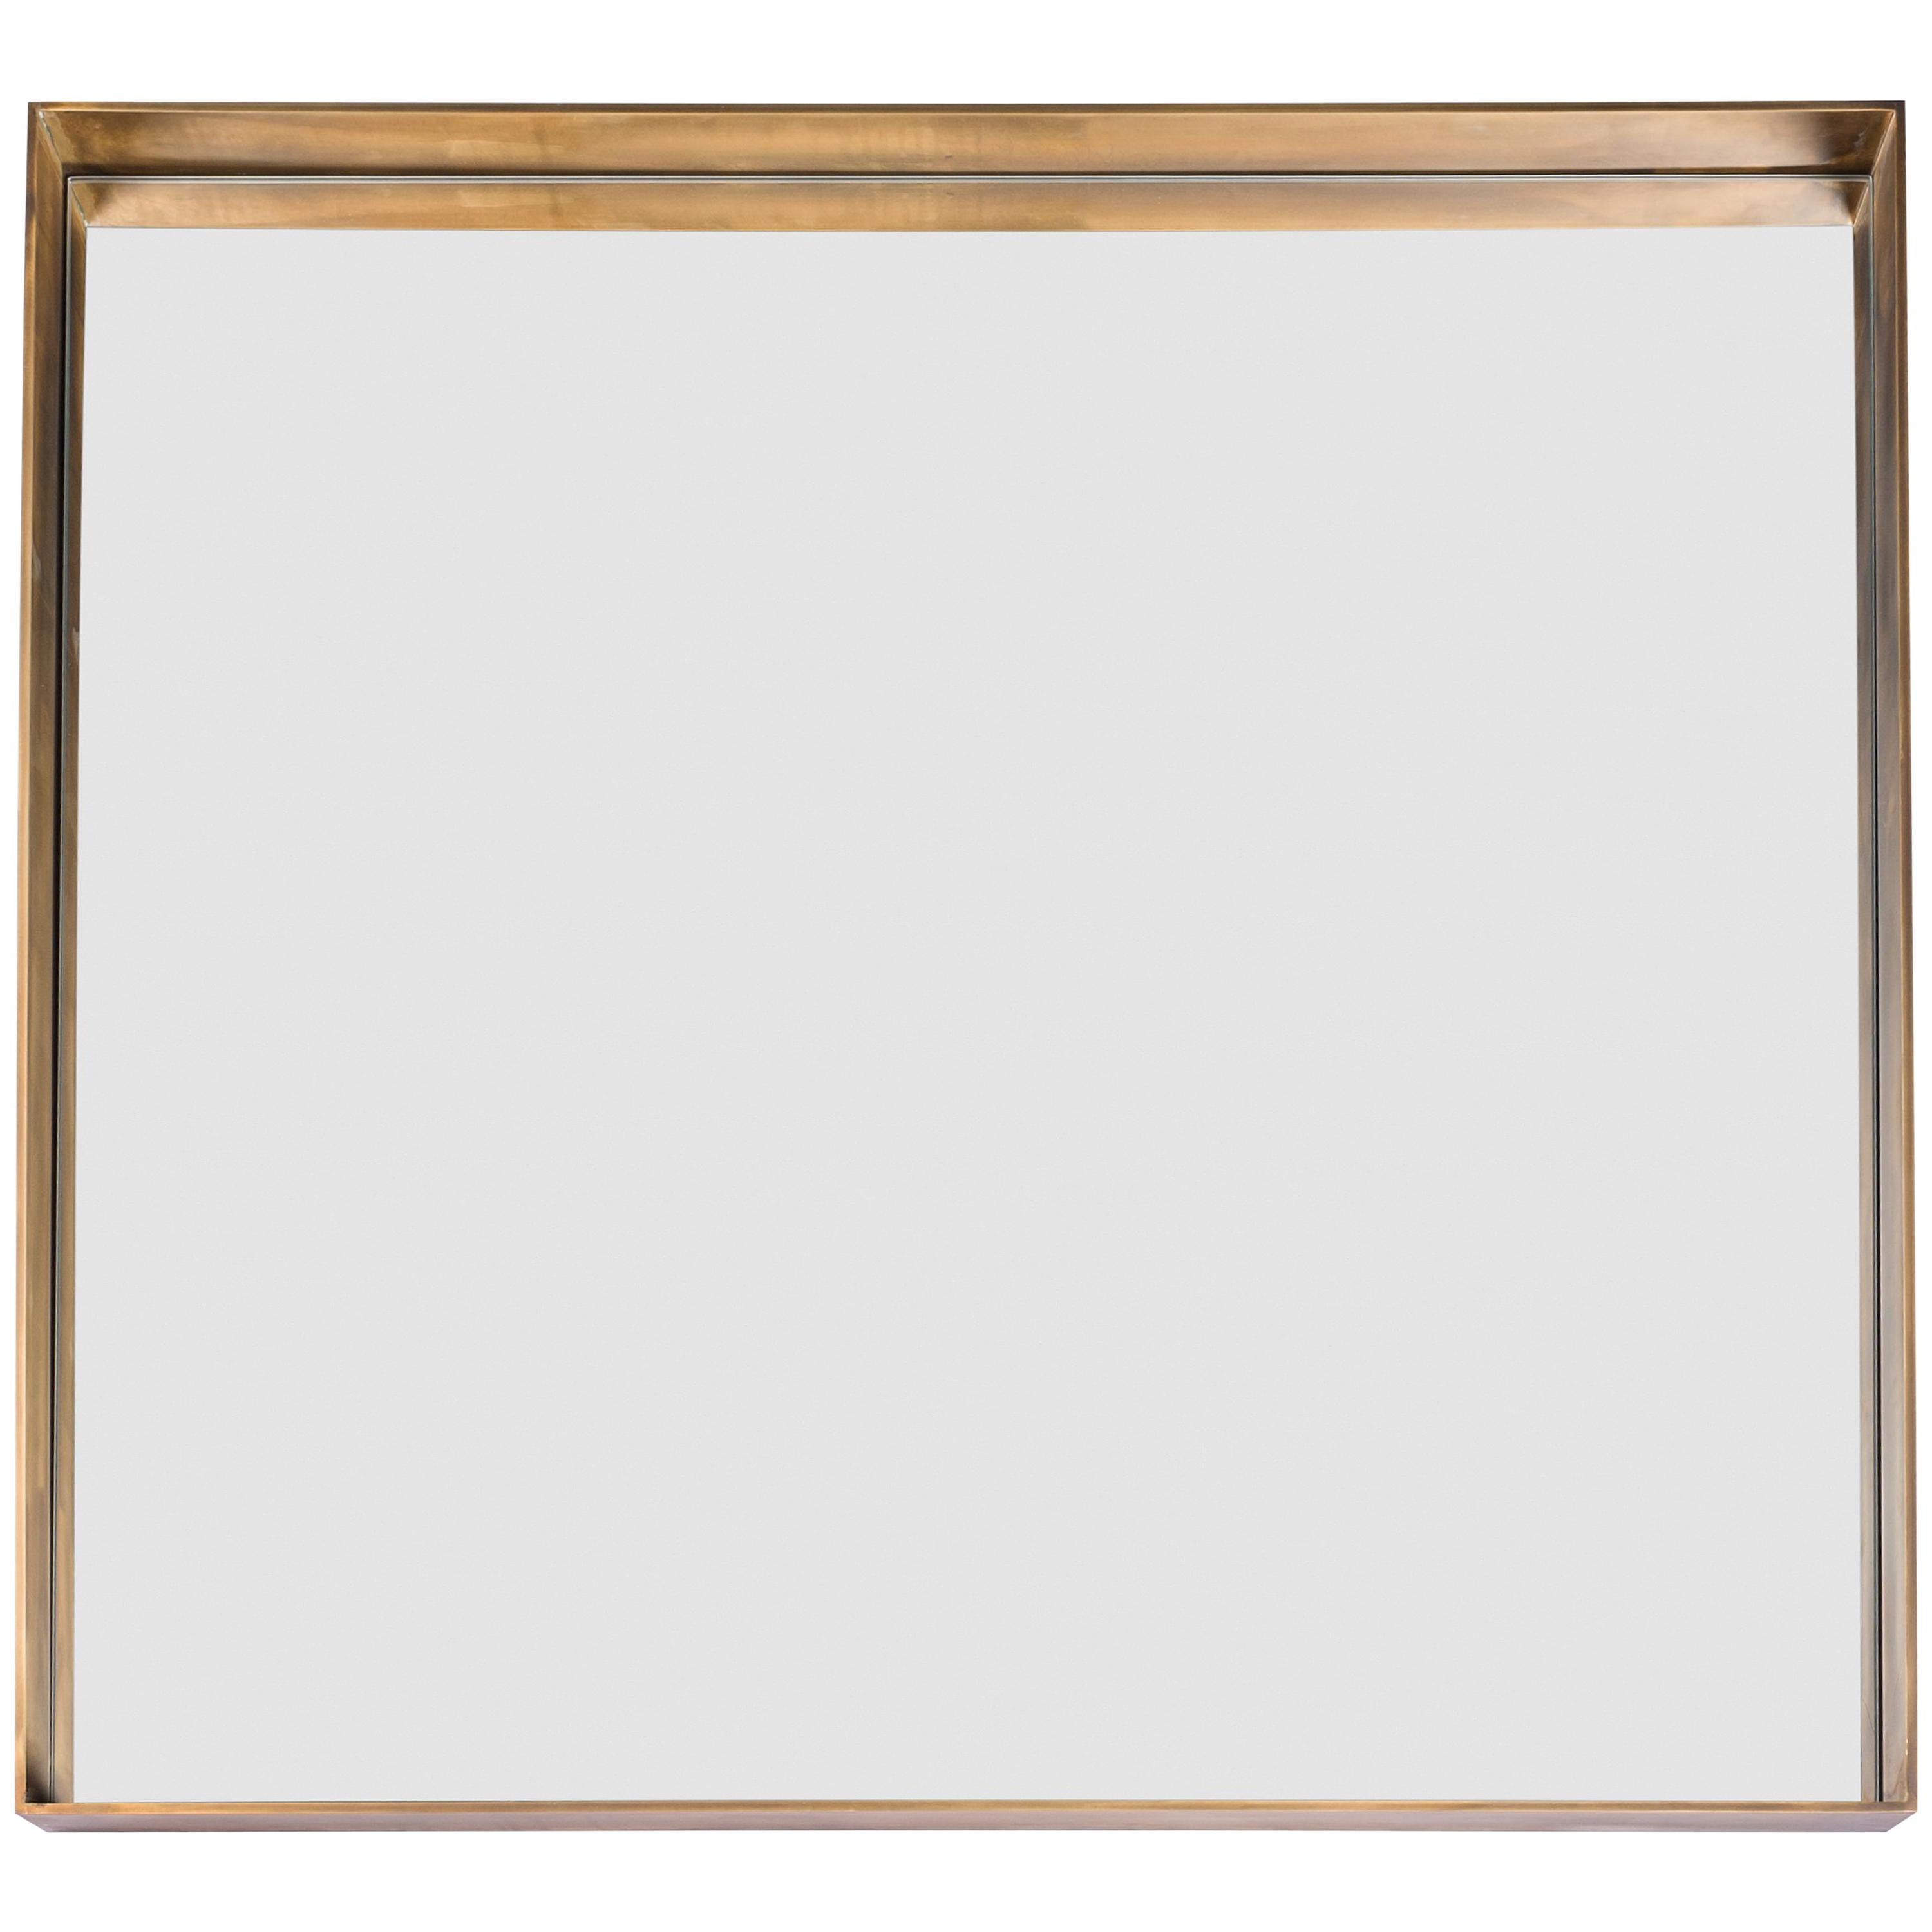 Salvatori Square Quadro Mirror with Deep Frame in Burnished Brass For Sale